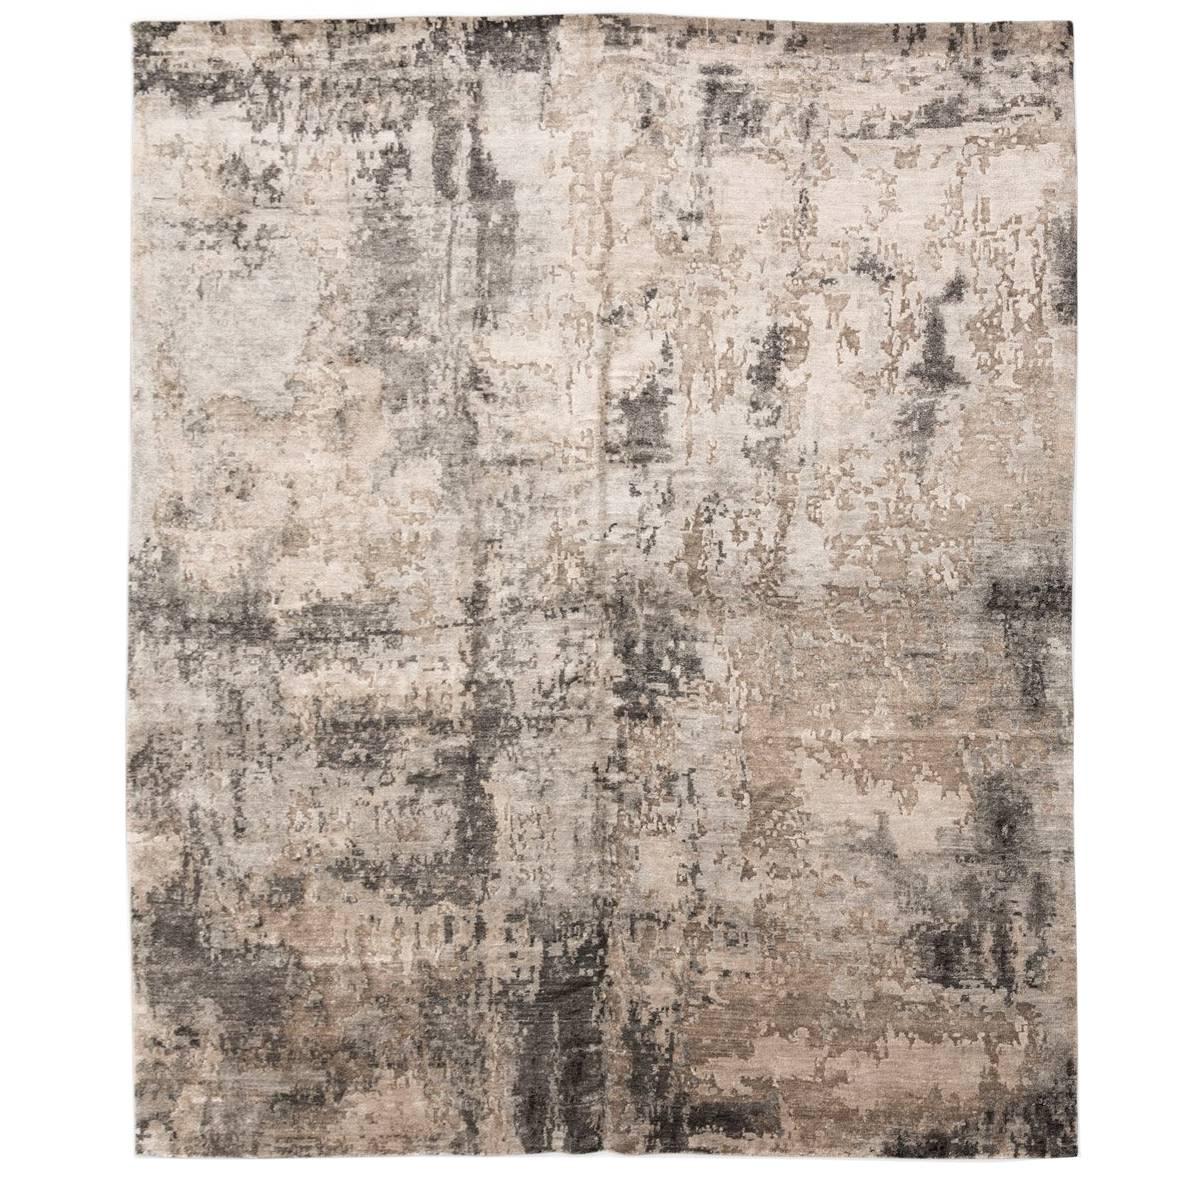 Contemporary Silk and Wool Rug, Abstract Design in Beige and Gray Colors